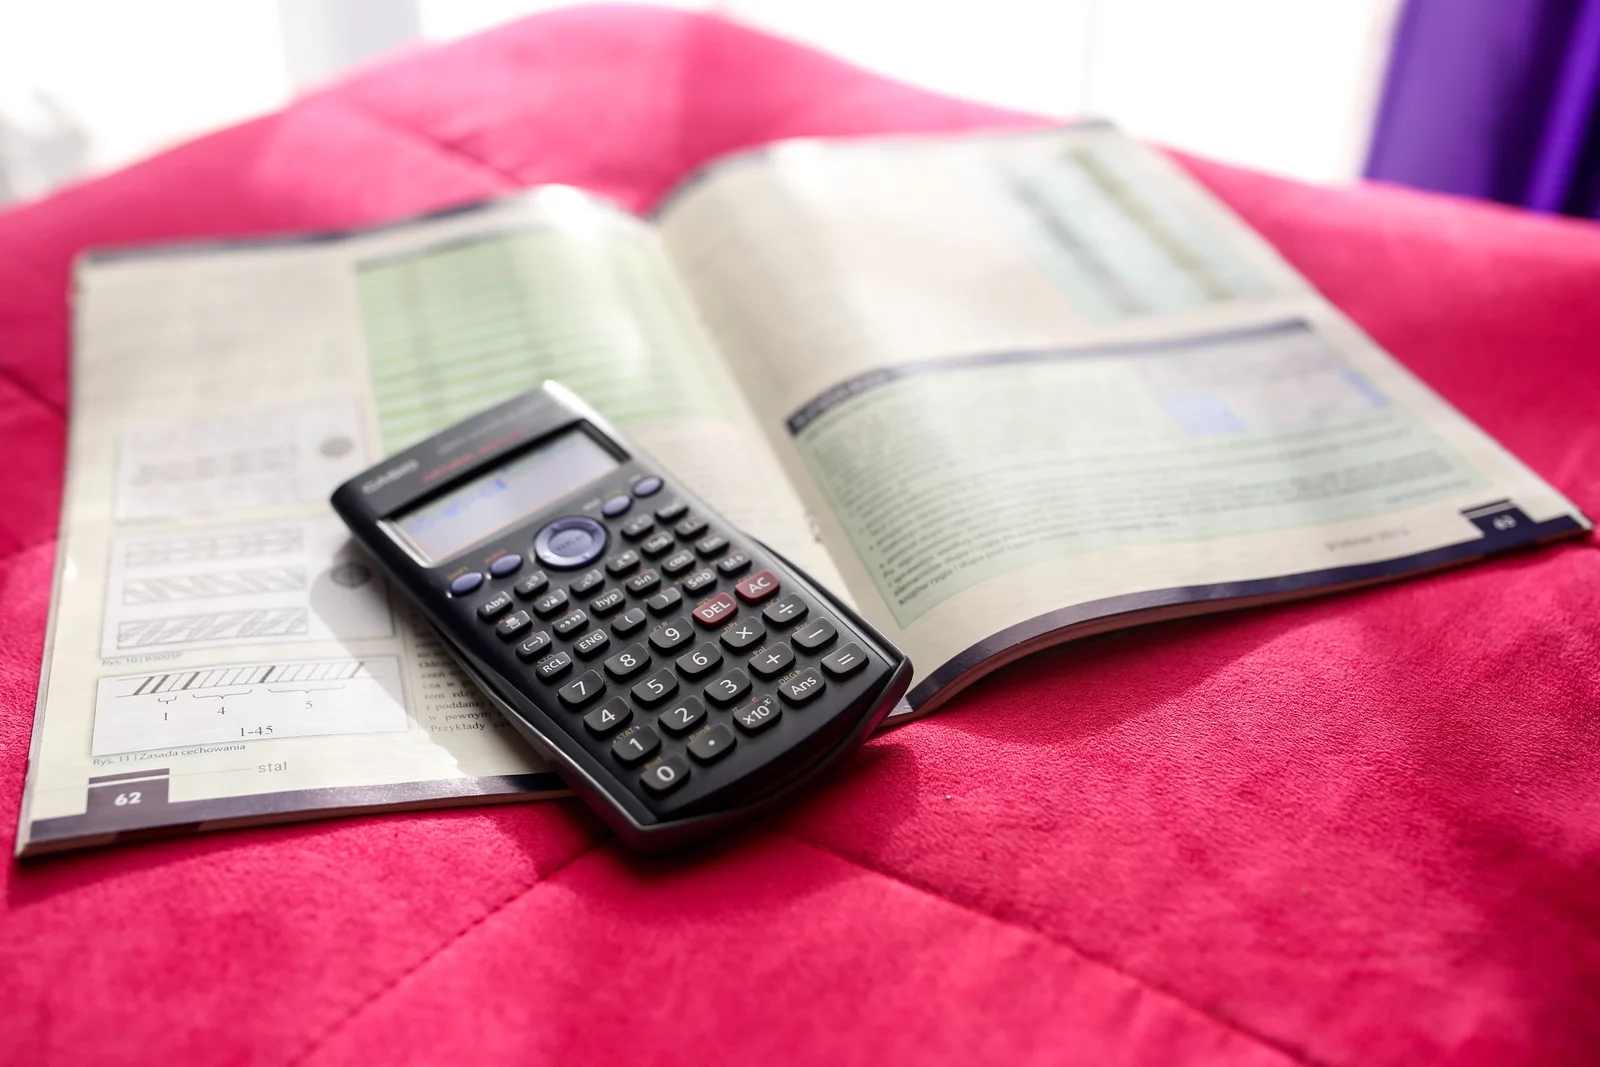 Calculator and a book on top of red fabric